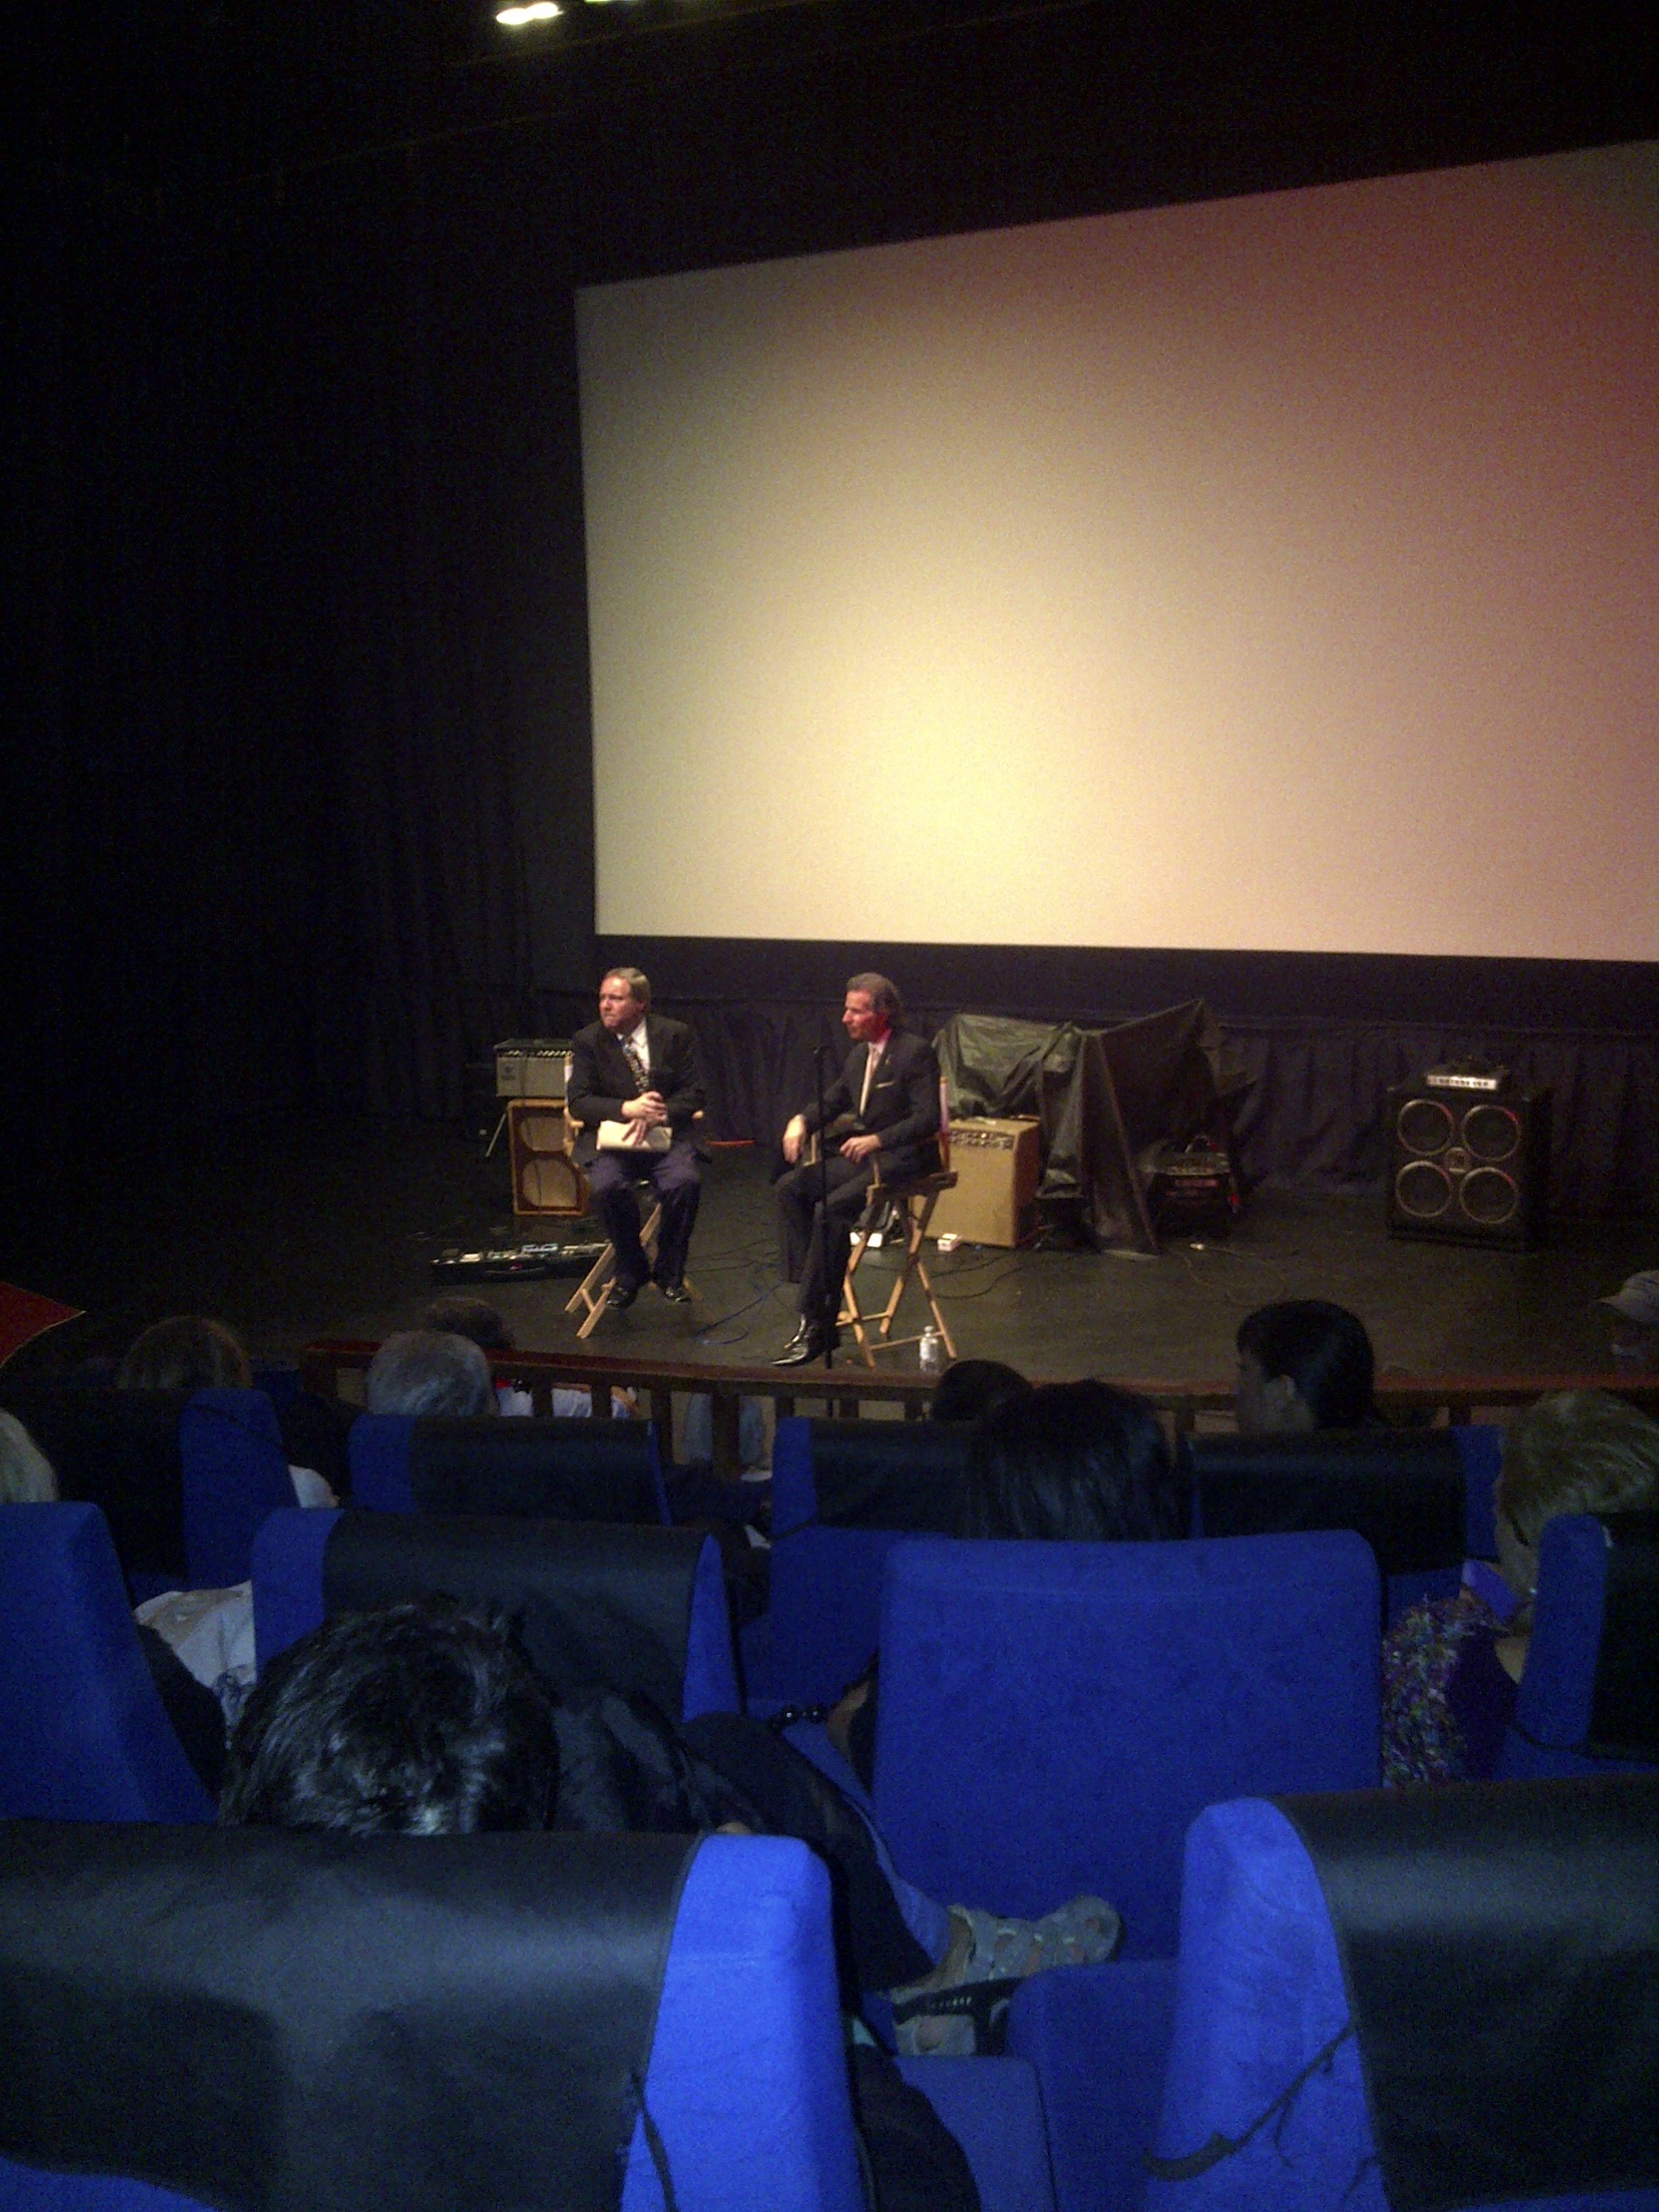 Richard Warren Rappaport interviewed by Prof. Rob Davis after the premiere of CONCERT at the Ft. Lauderdale International Film Festival, 2011.